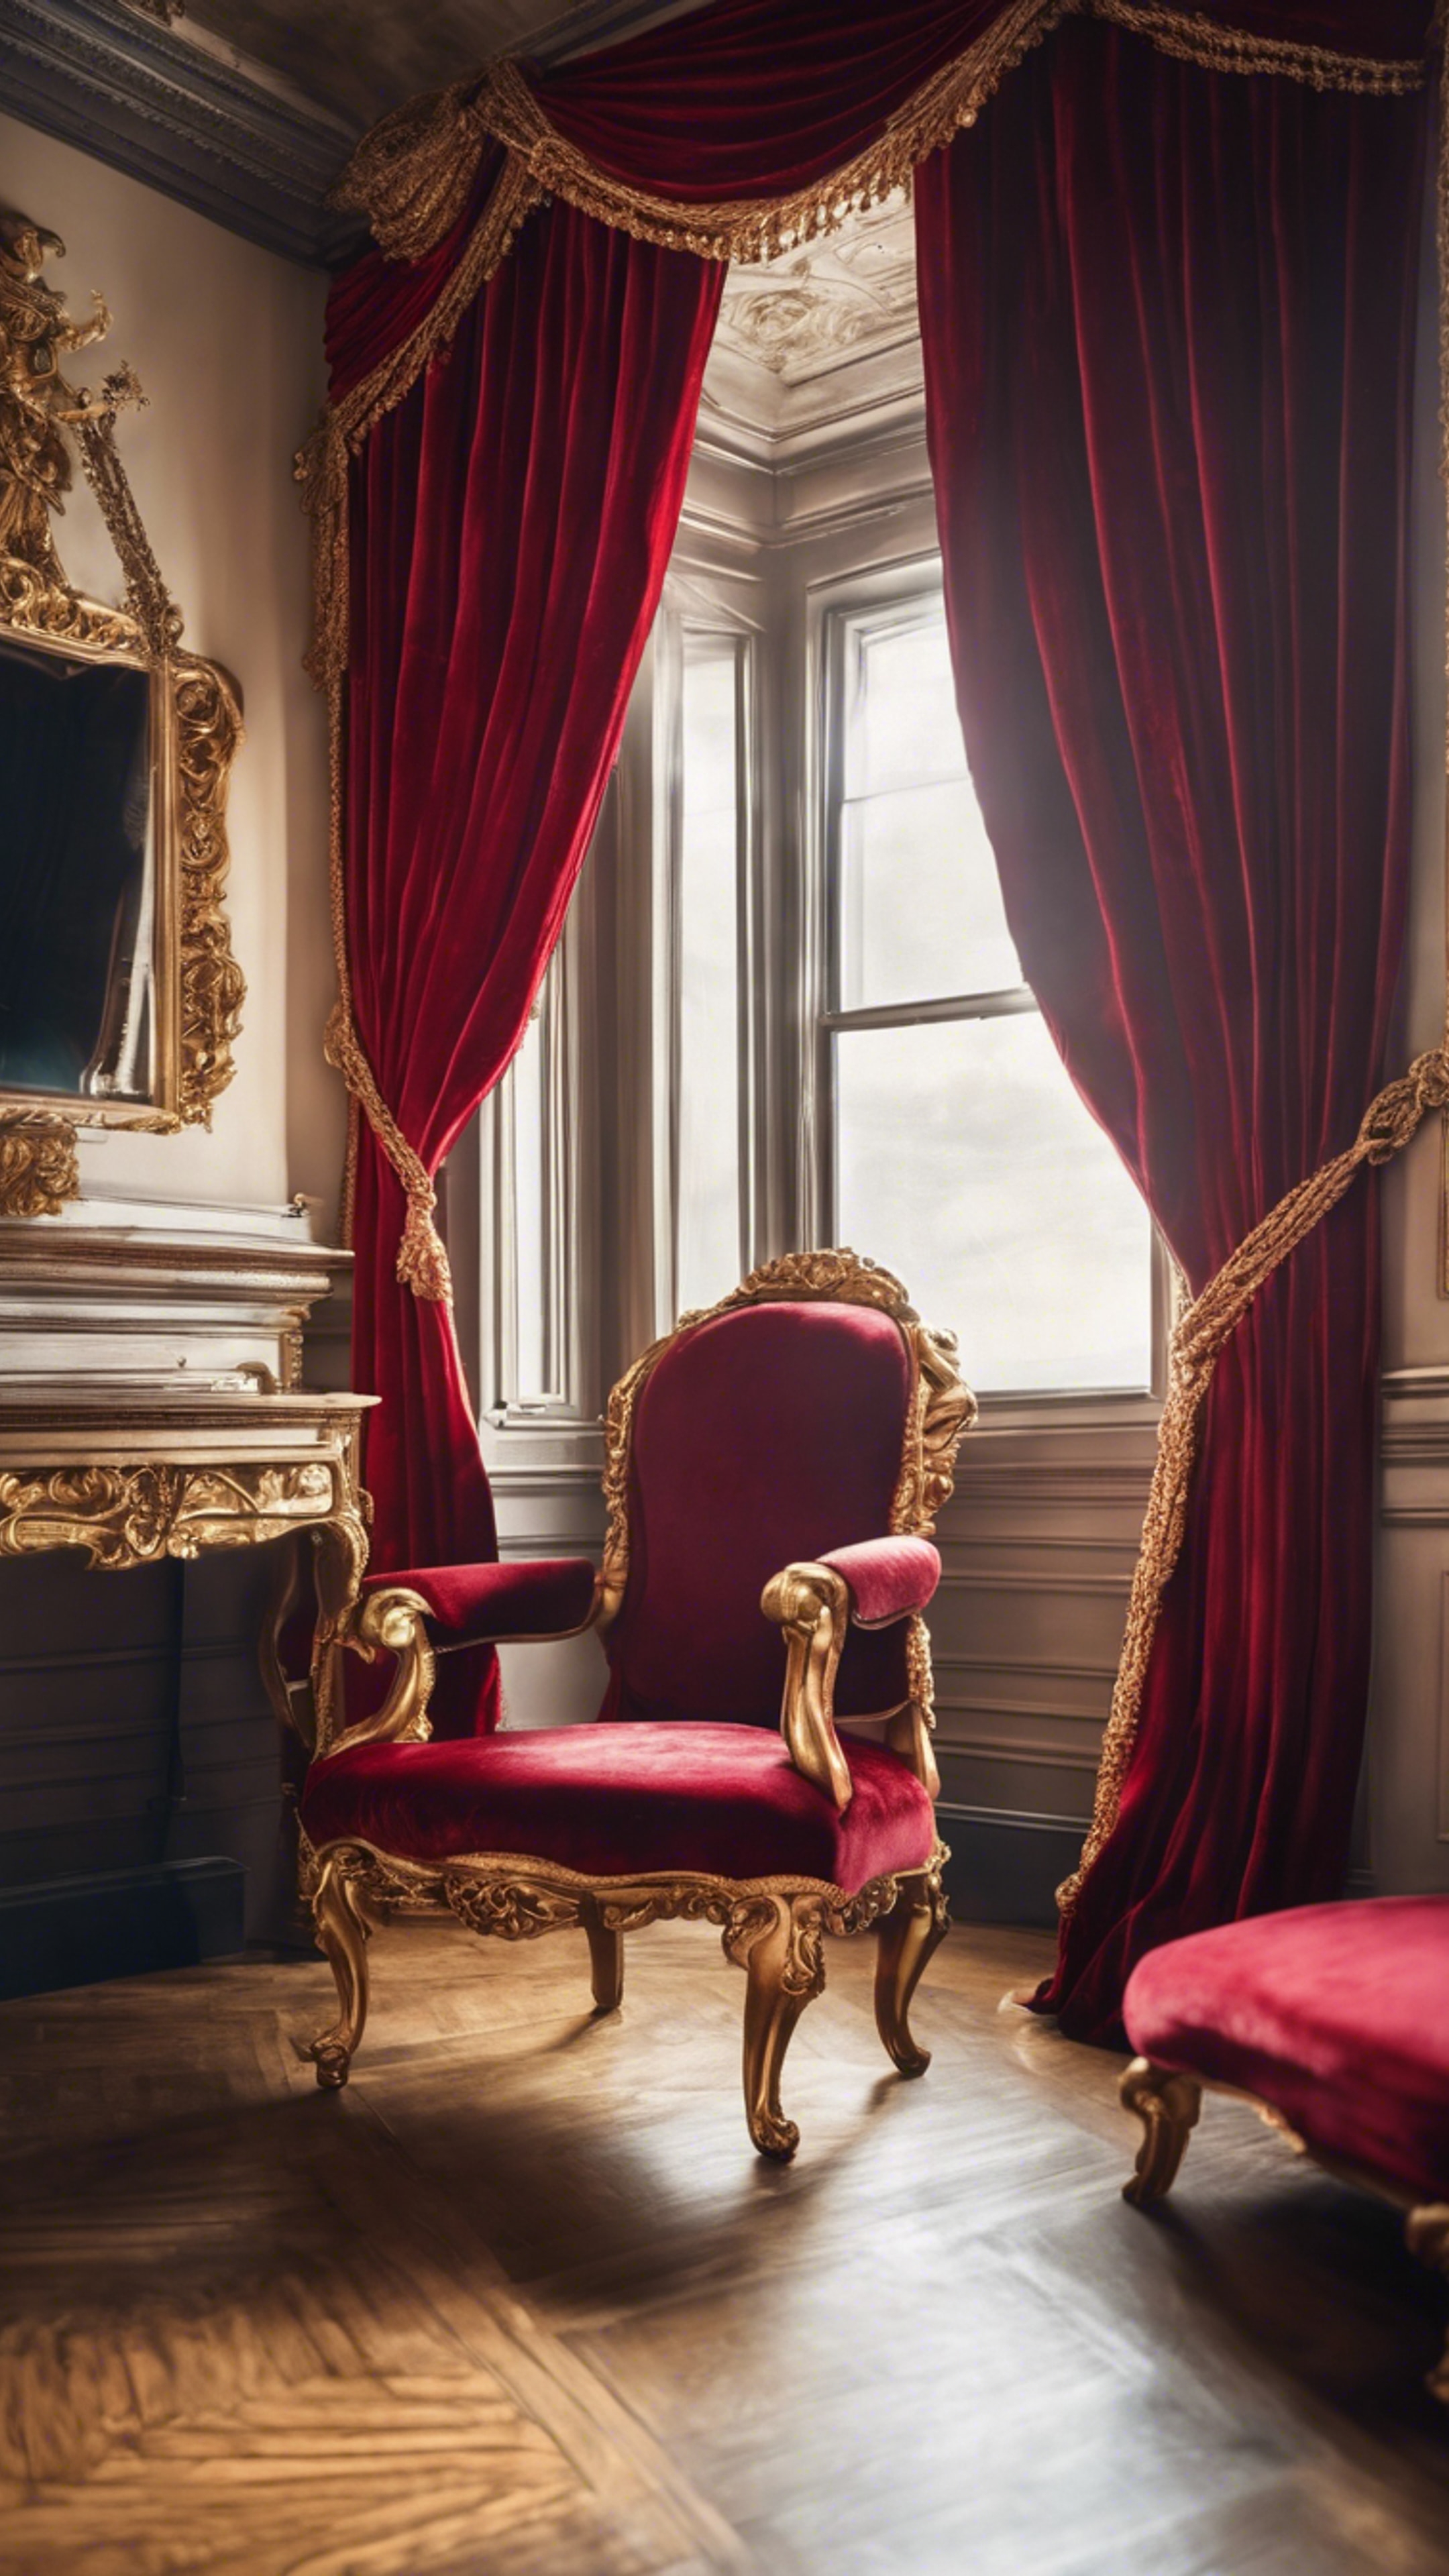 Red velvet drapes tied back with gold ropes in a grand victorian-style living room. Tapet[6c8dd2a9b4f74c0eb869]